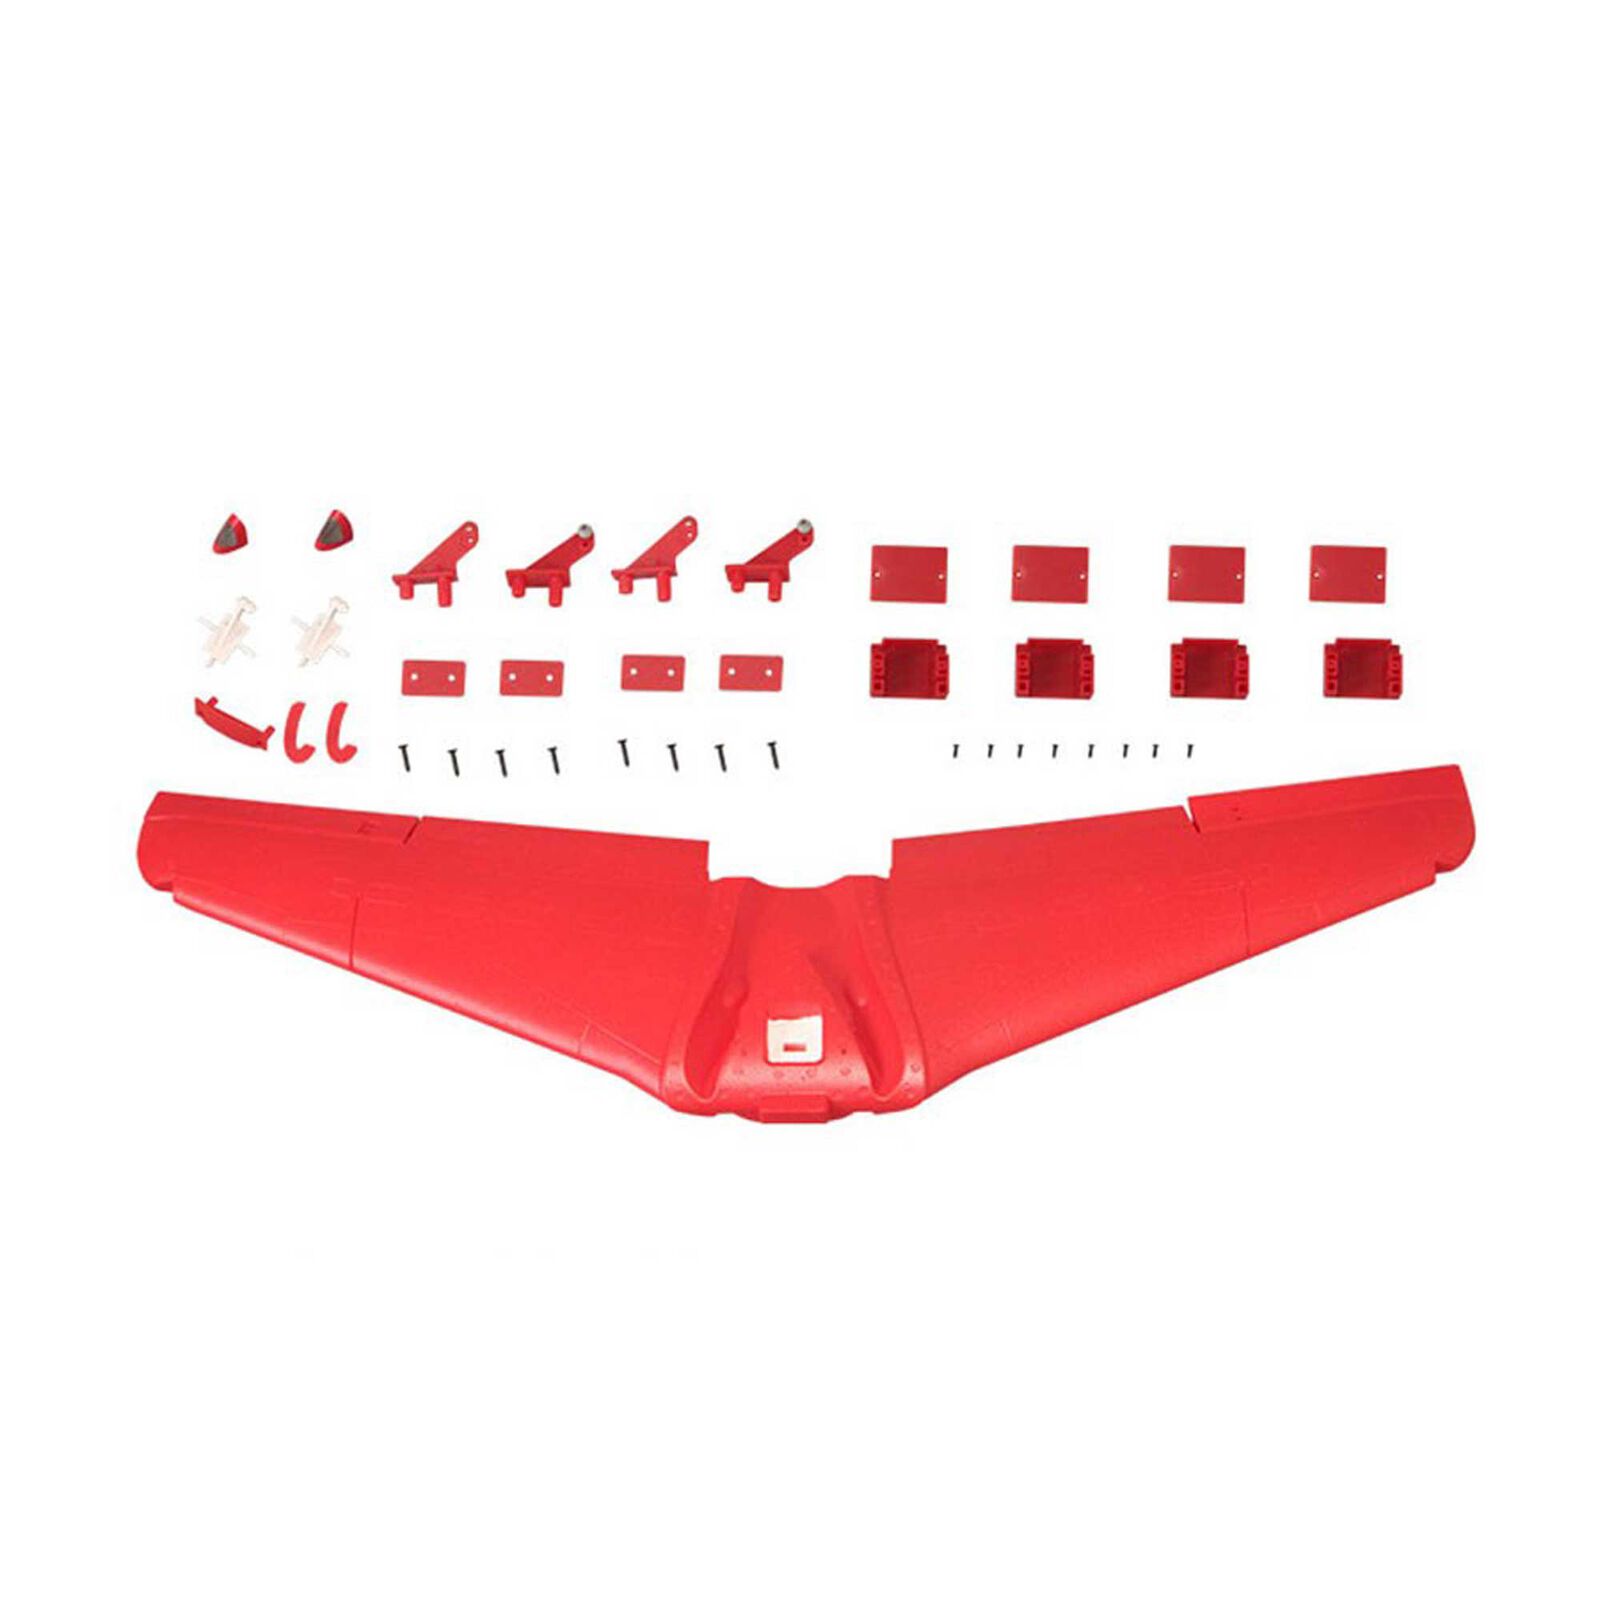 Main Wing Set: Red Arrow 80mm